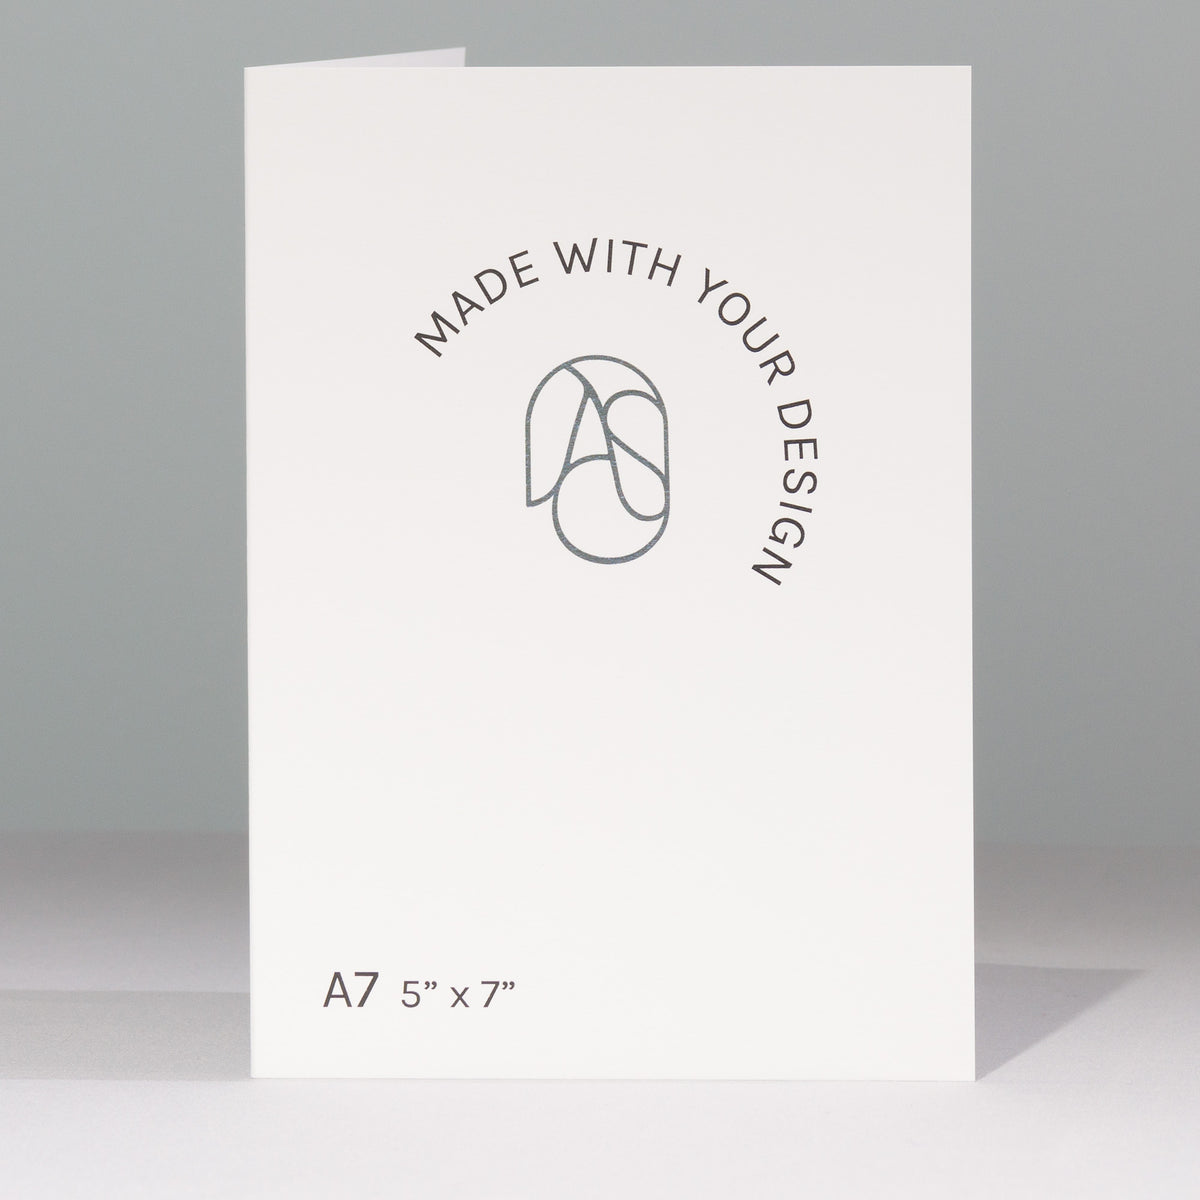 Superfine Greeting Cards